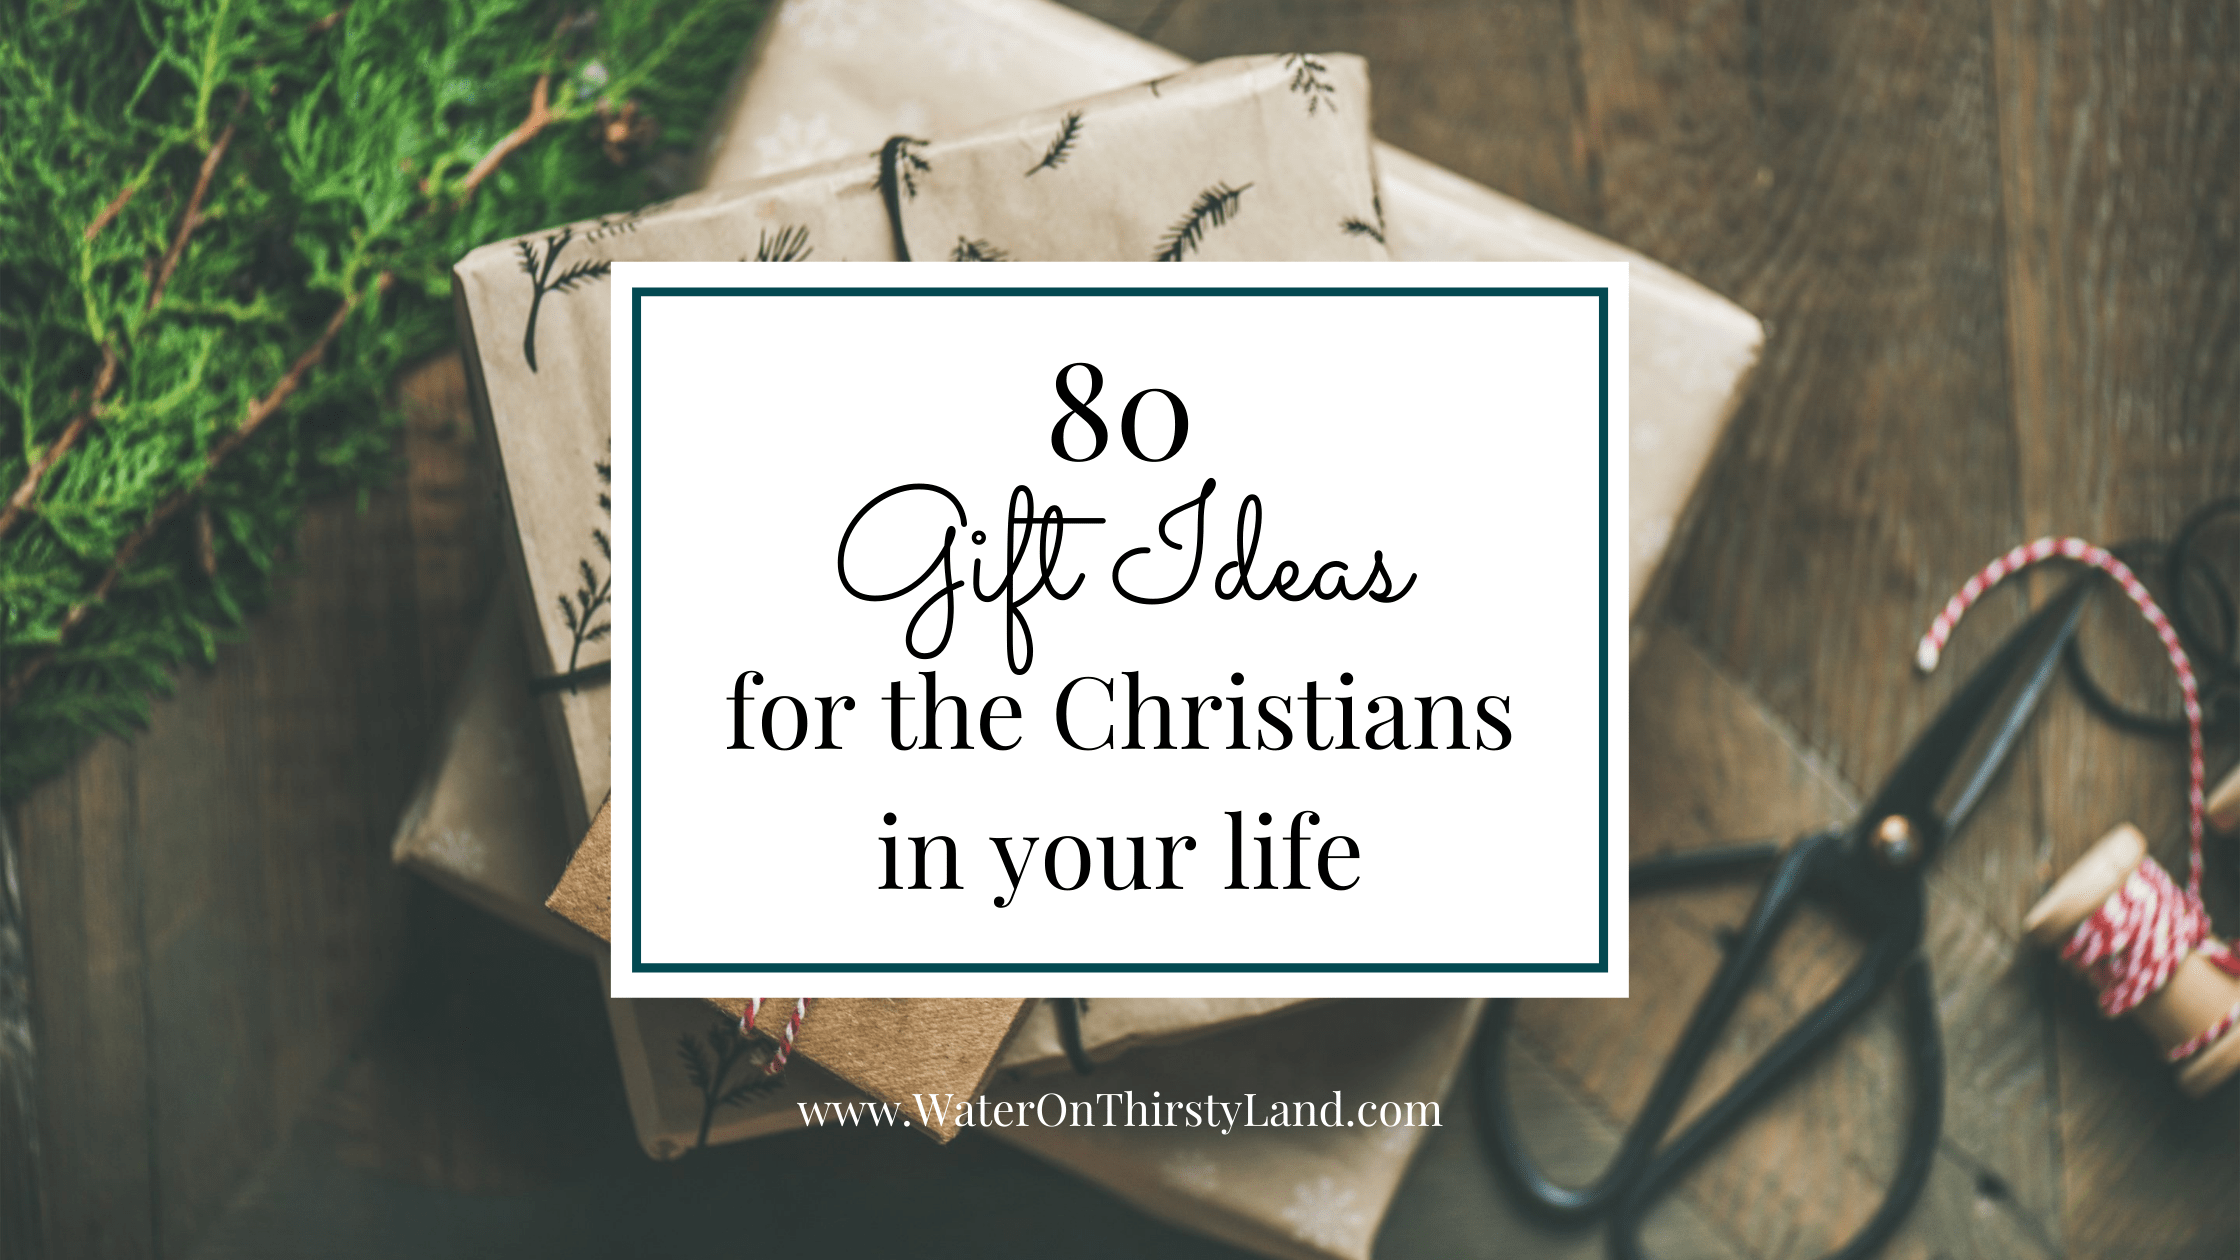 80 gift ideas for the Christians in your life